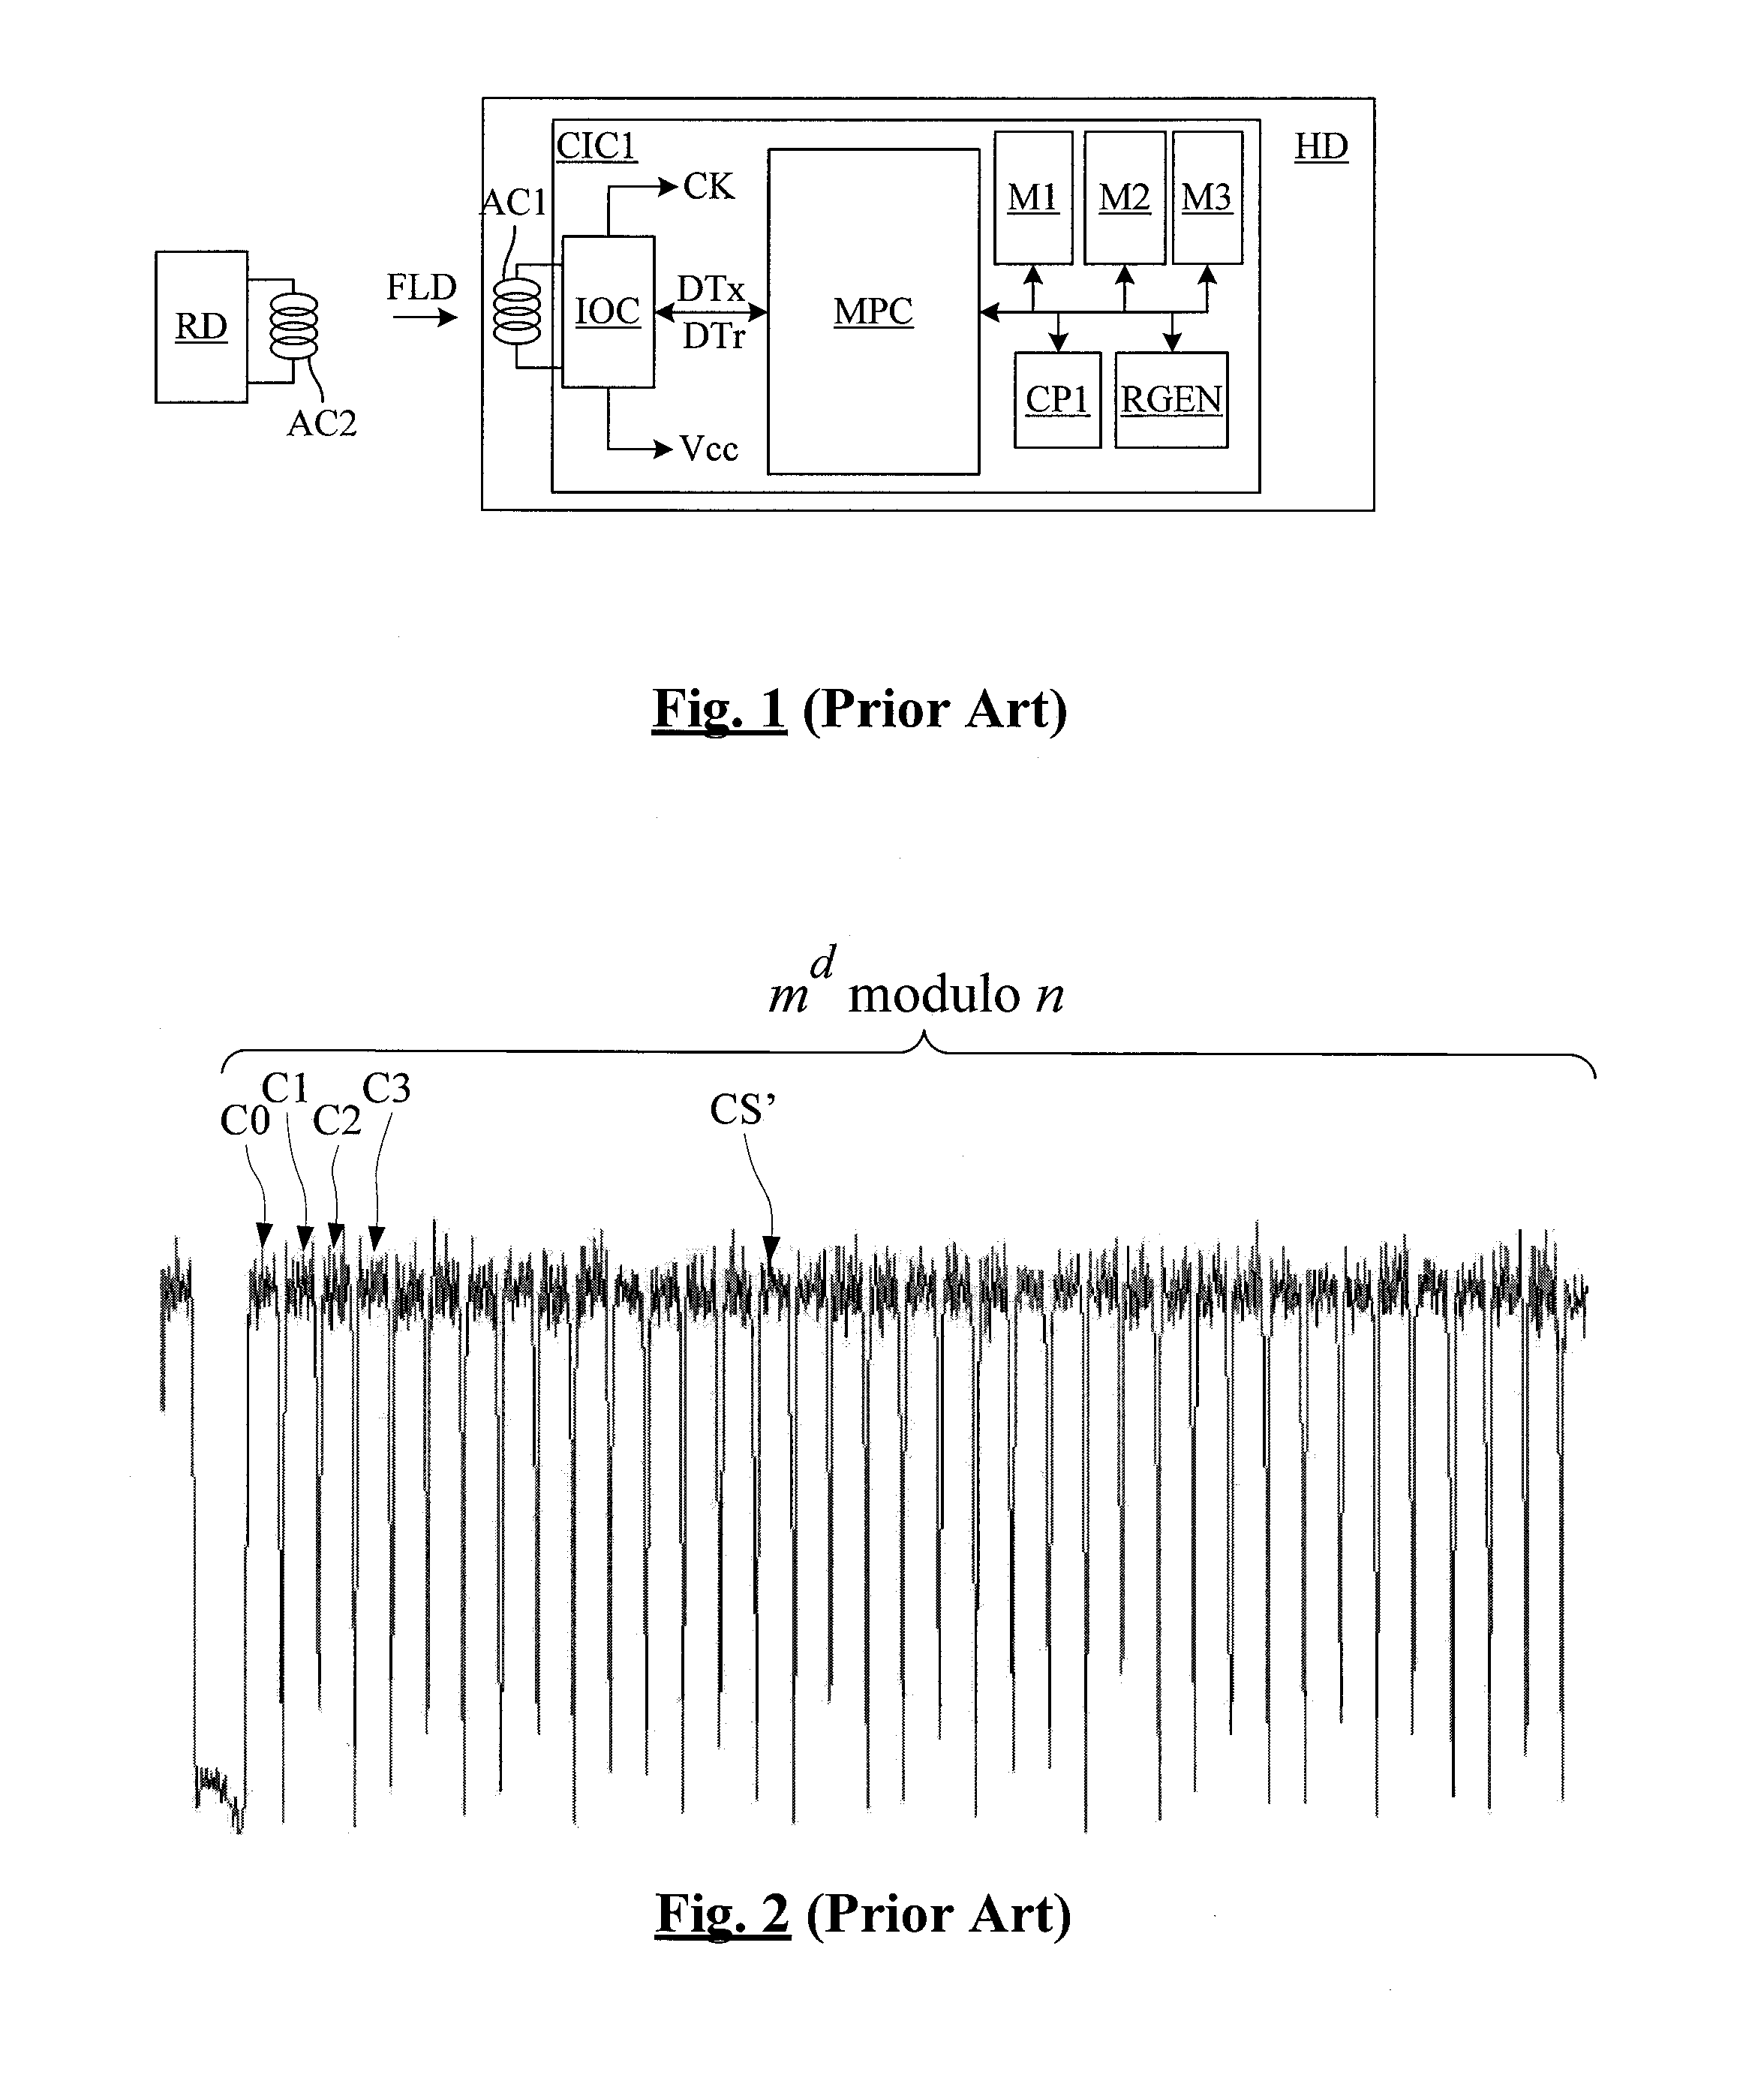 Integrated circuit protected against horizontal side channel analysis